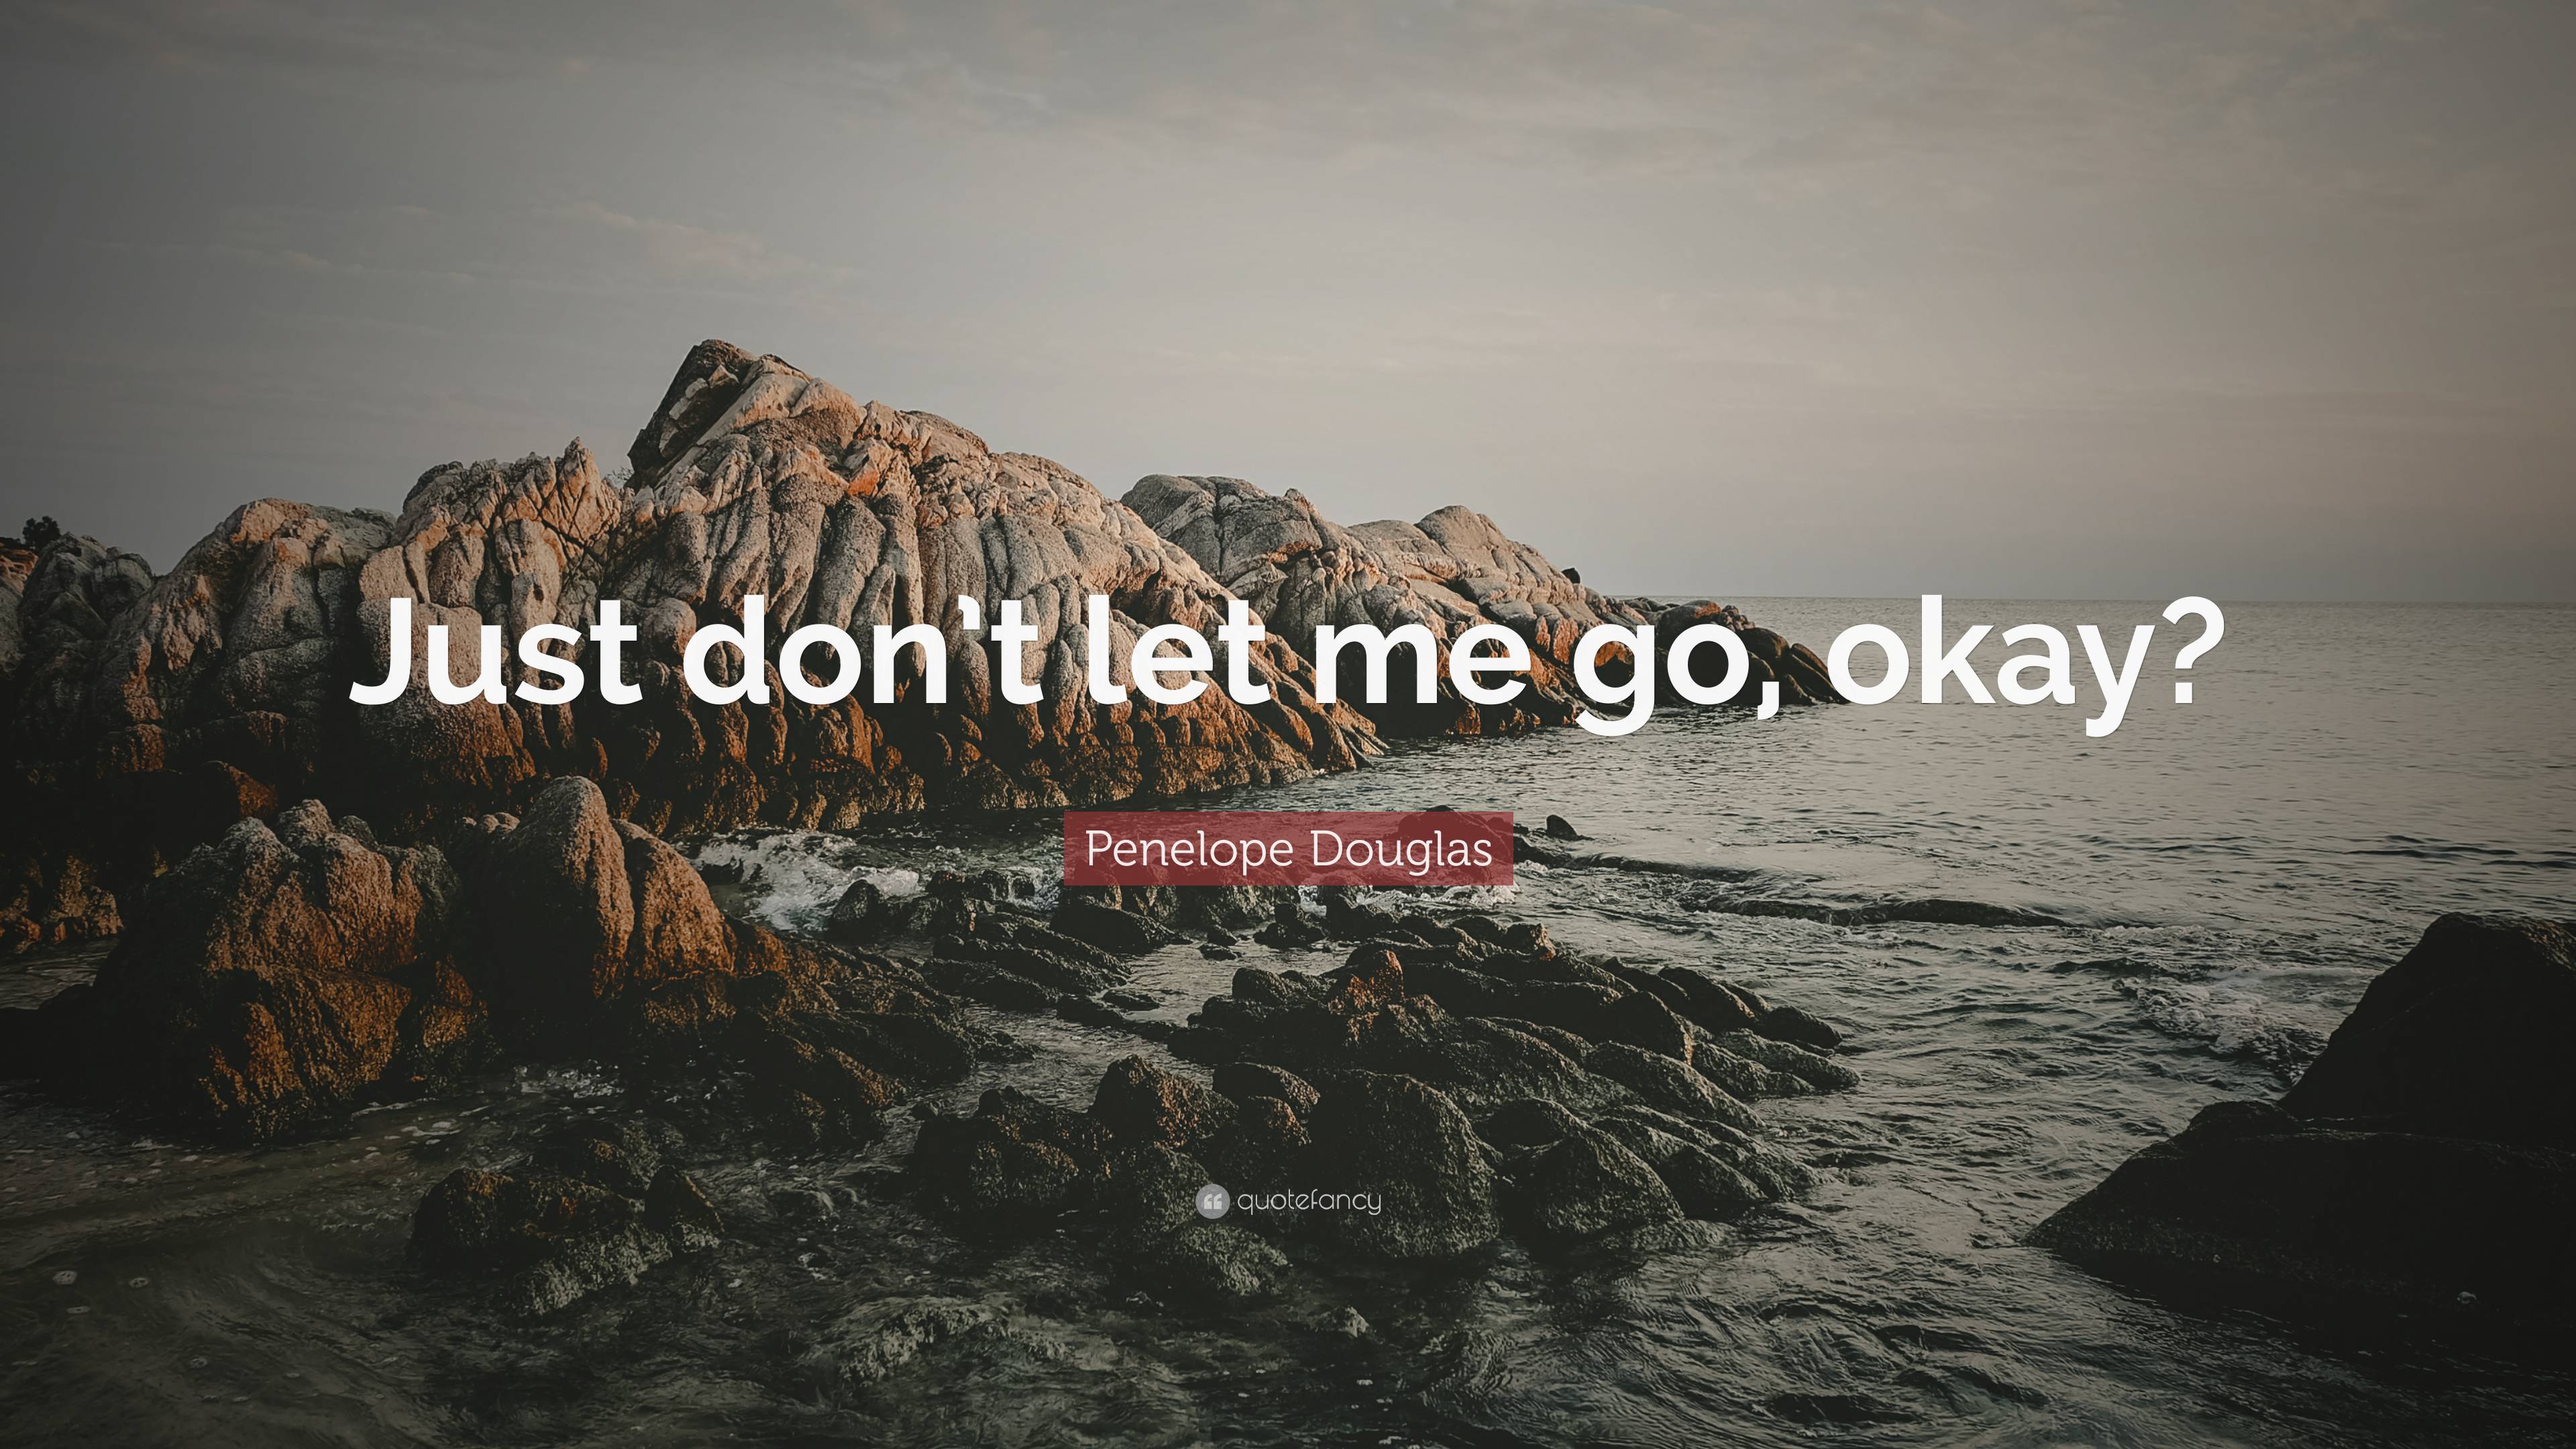 Don't Tell Me To Get Over It - Letting Go Quotes